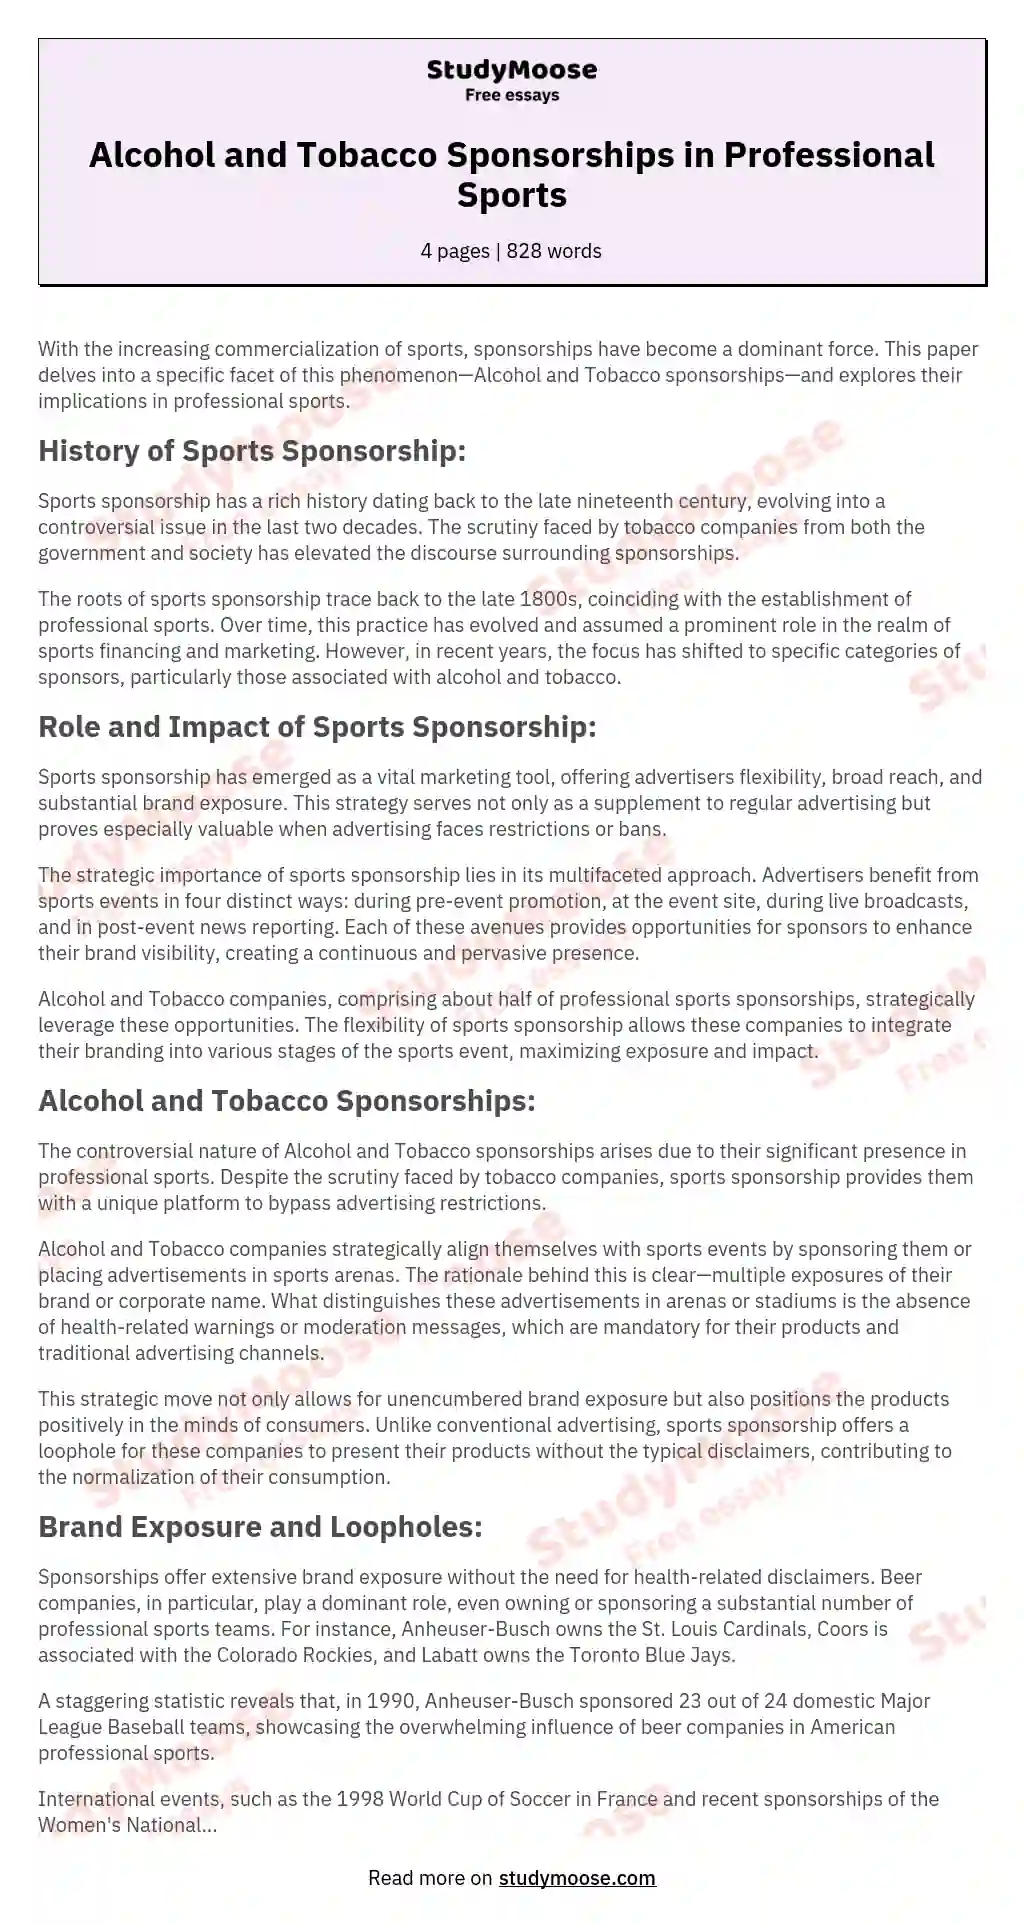 Alcohol and Tobacco Sponsorships in Professional Sports essay